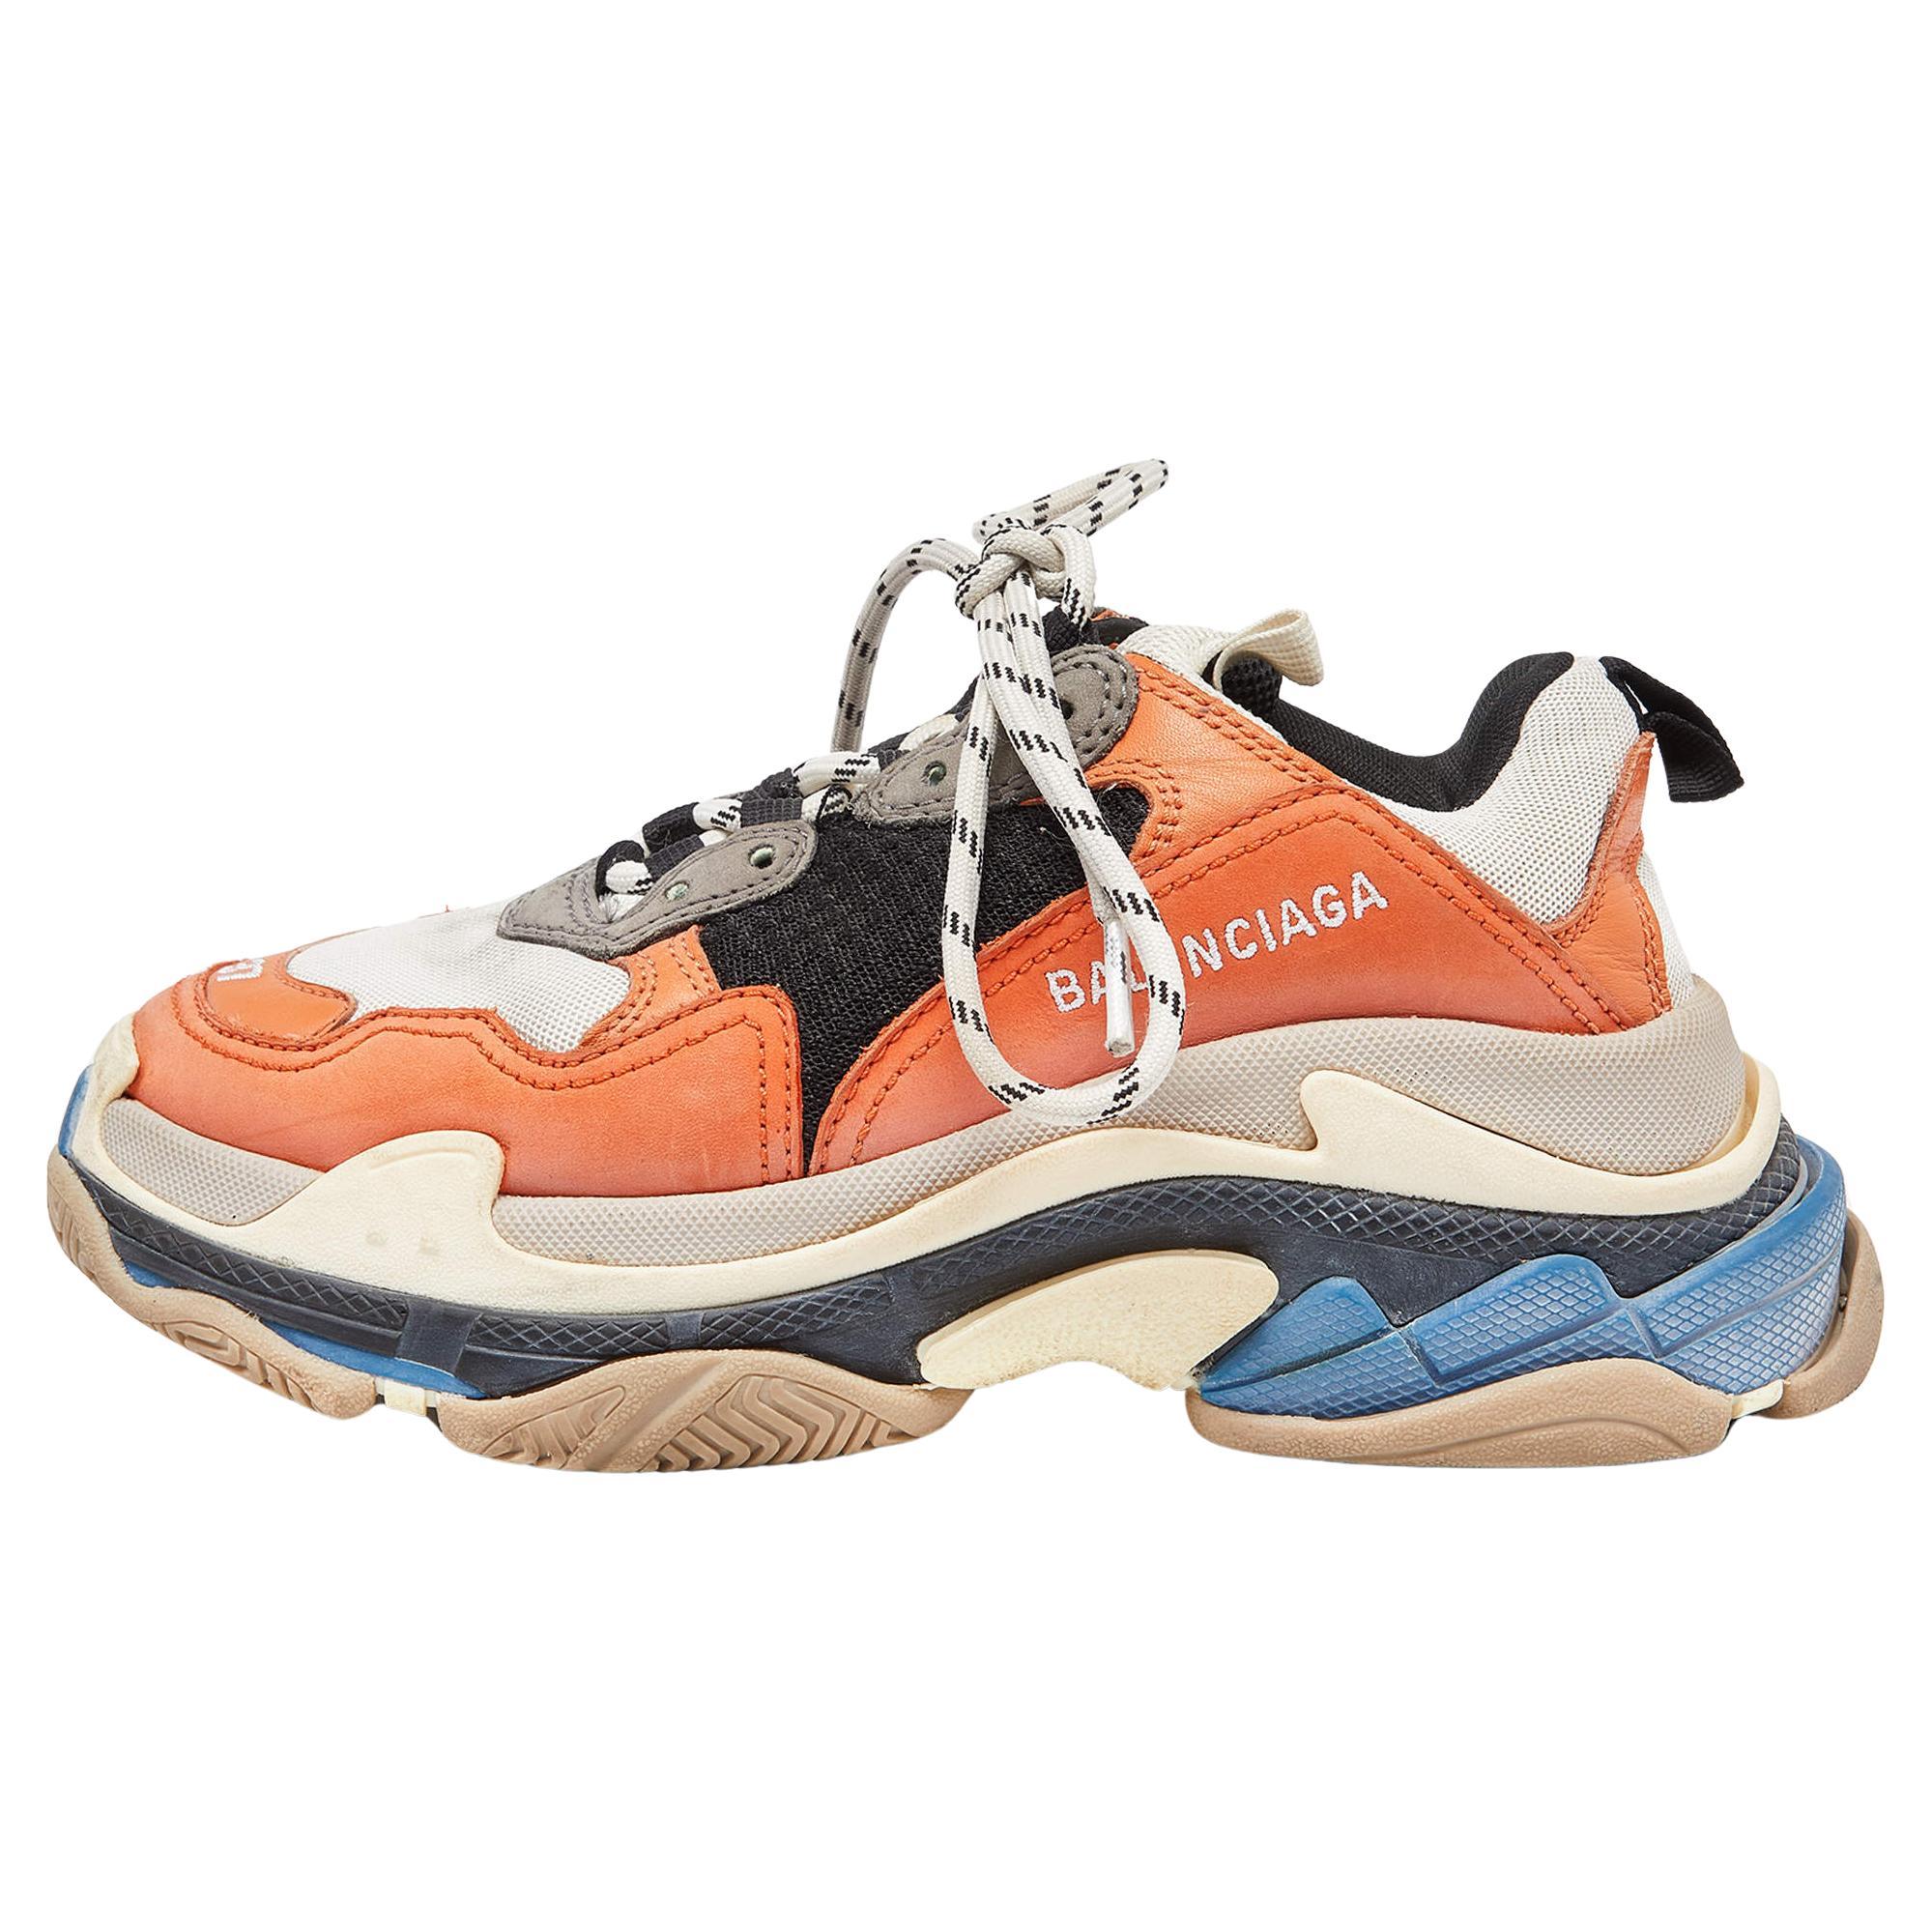 Balenciaga Tricolor Leather and Mesh Triple S Sneakers Size 37 For Sale